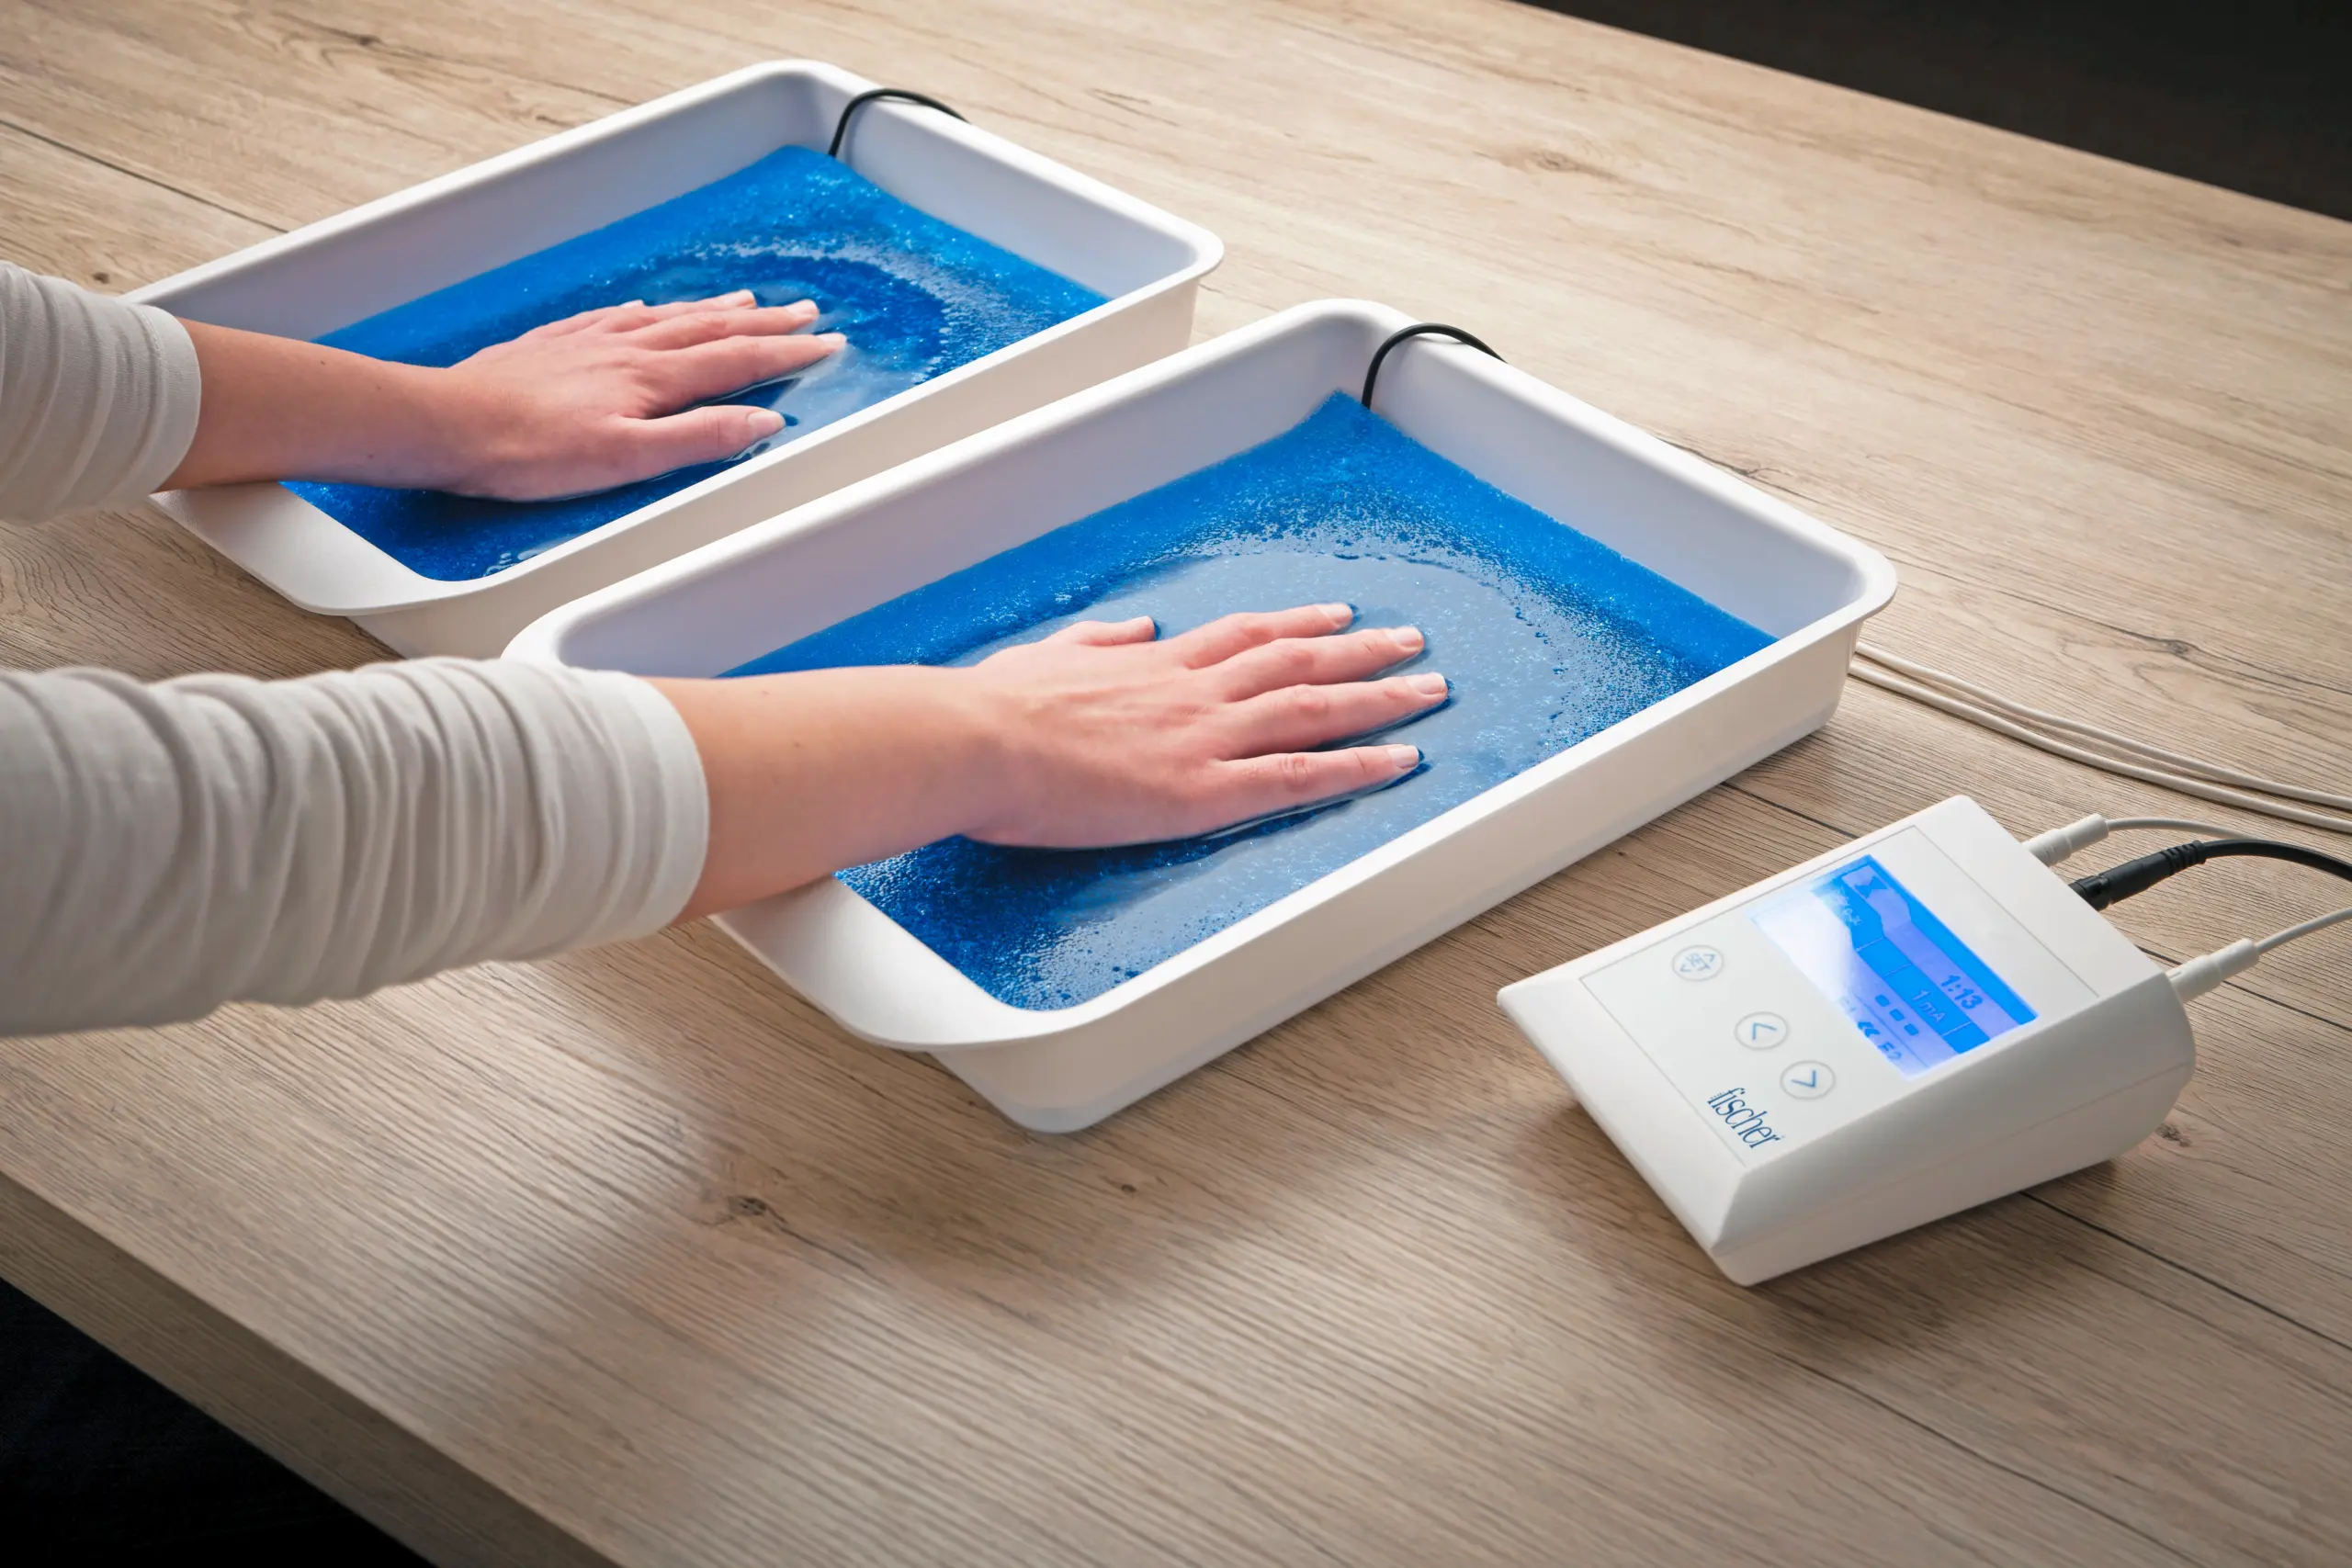 Photograph of a person treating their palmar hyperhidrosis using RA Fischer Co.'s The Fischer iontophoresis device on a wooden table.